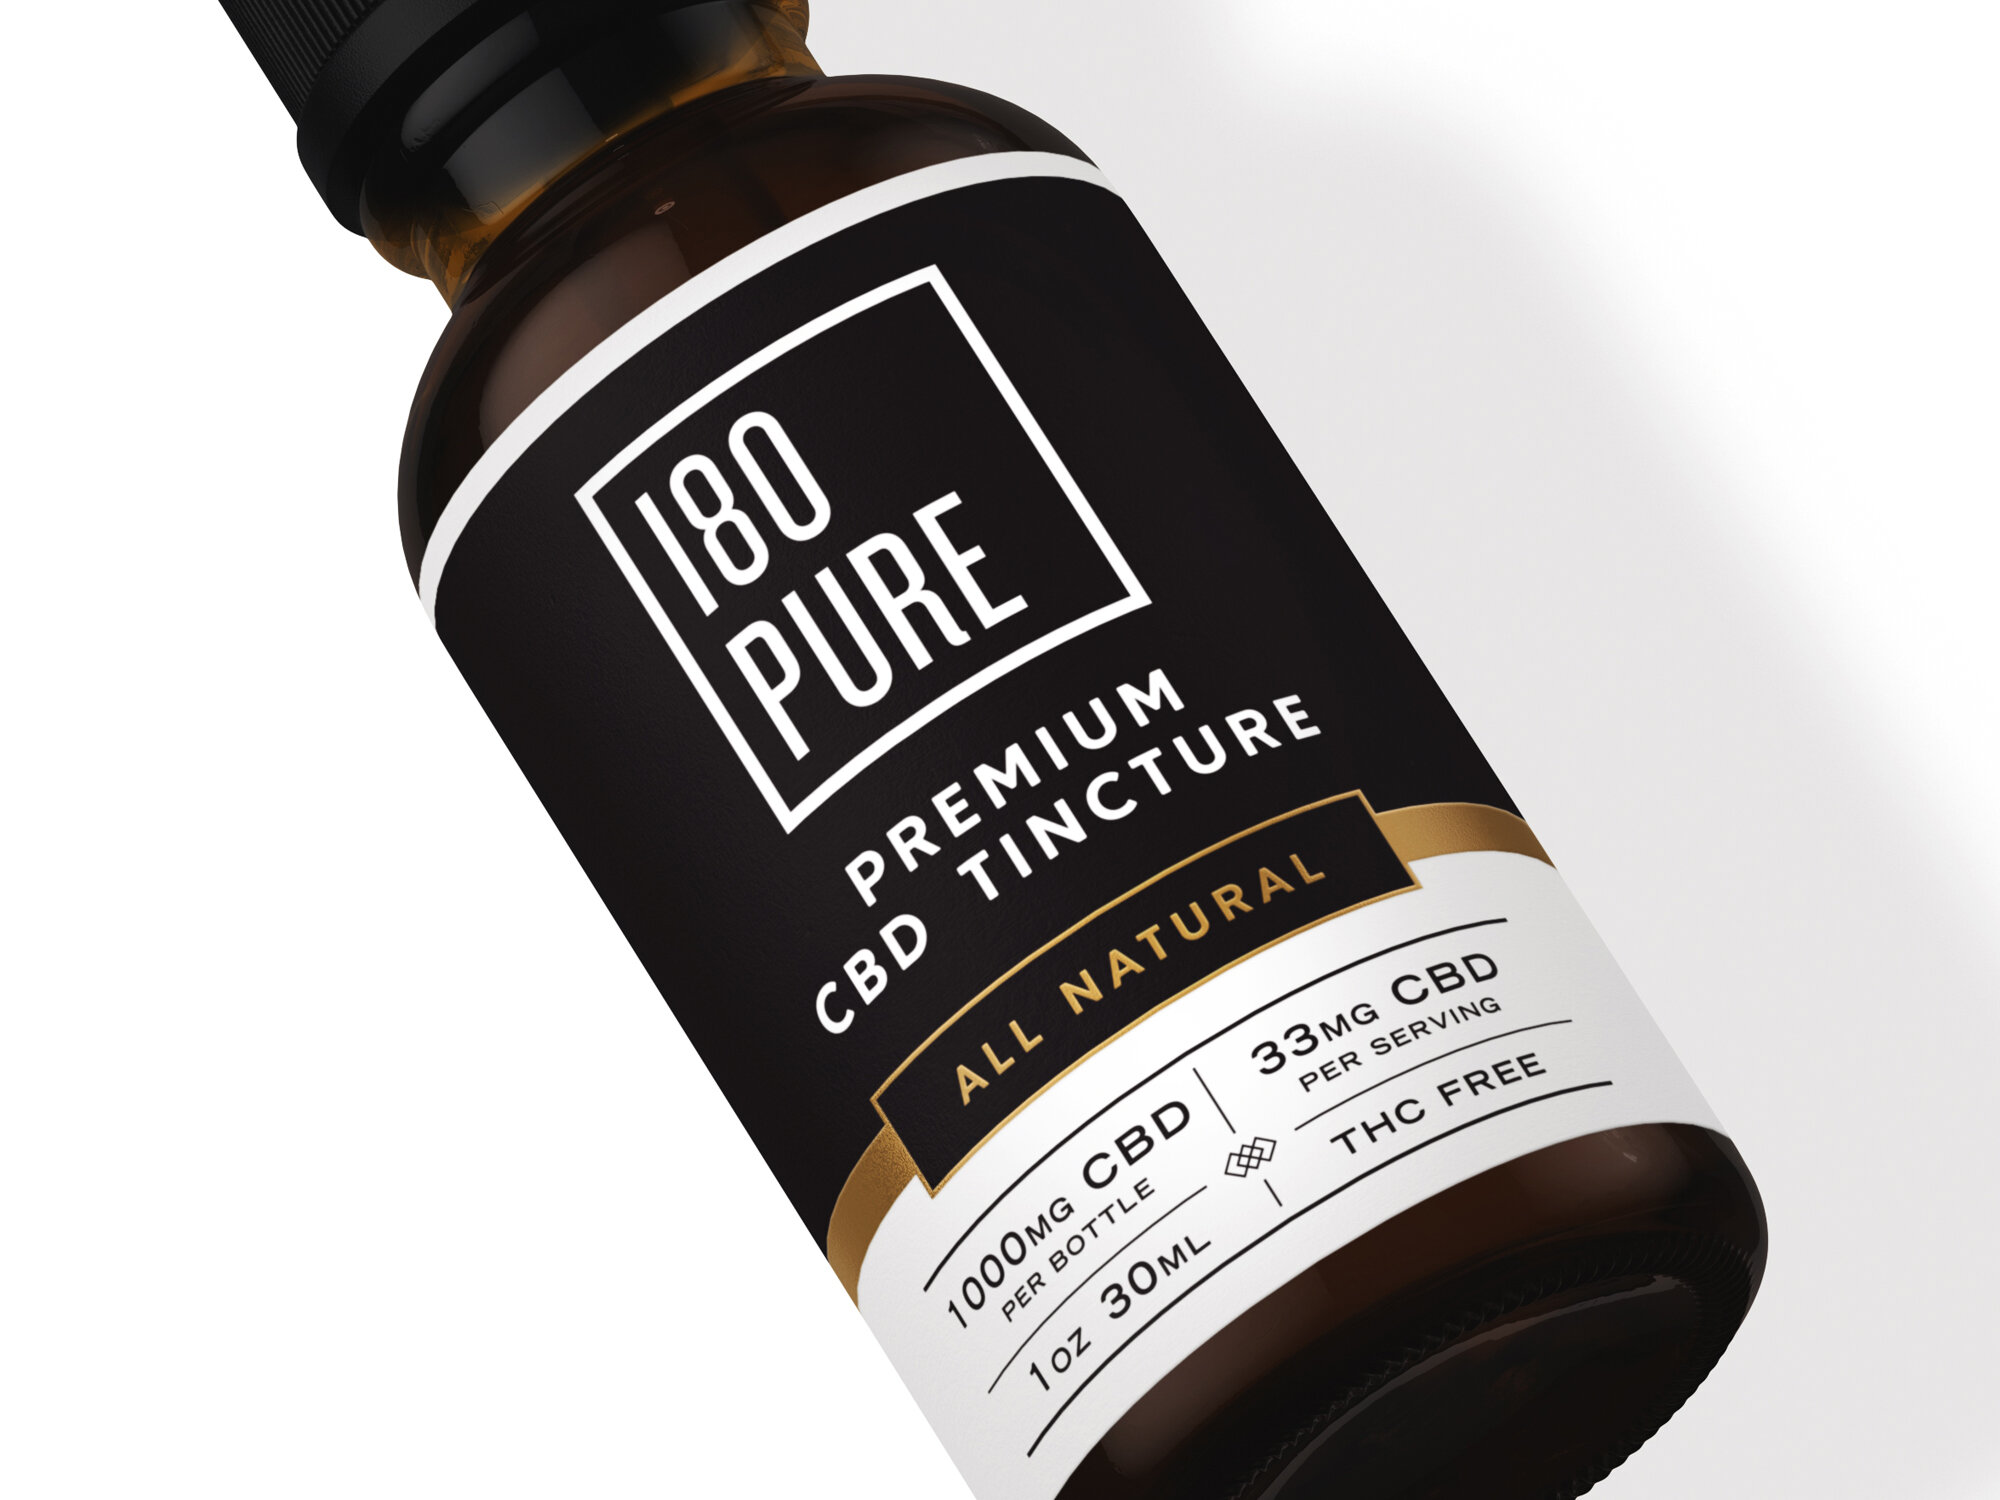 180Pure_Bottle_White_Cropped.jpg